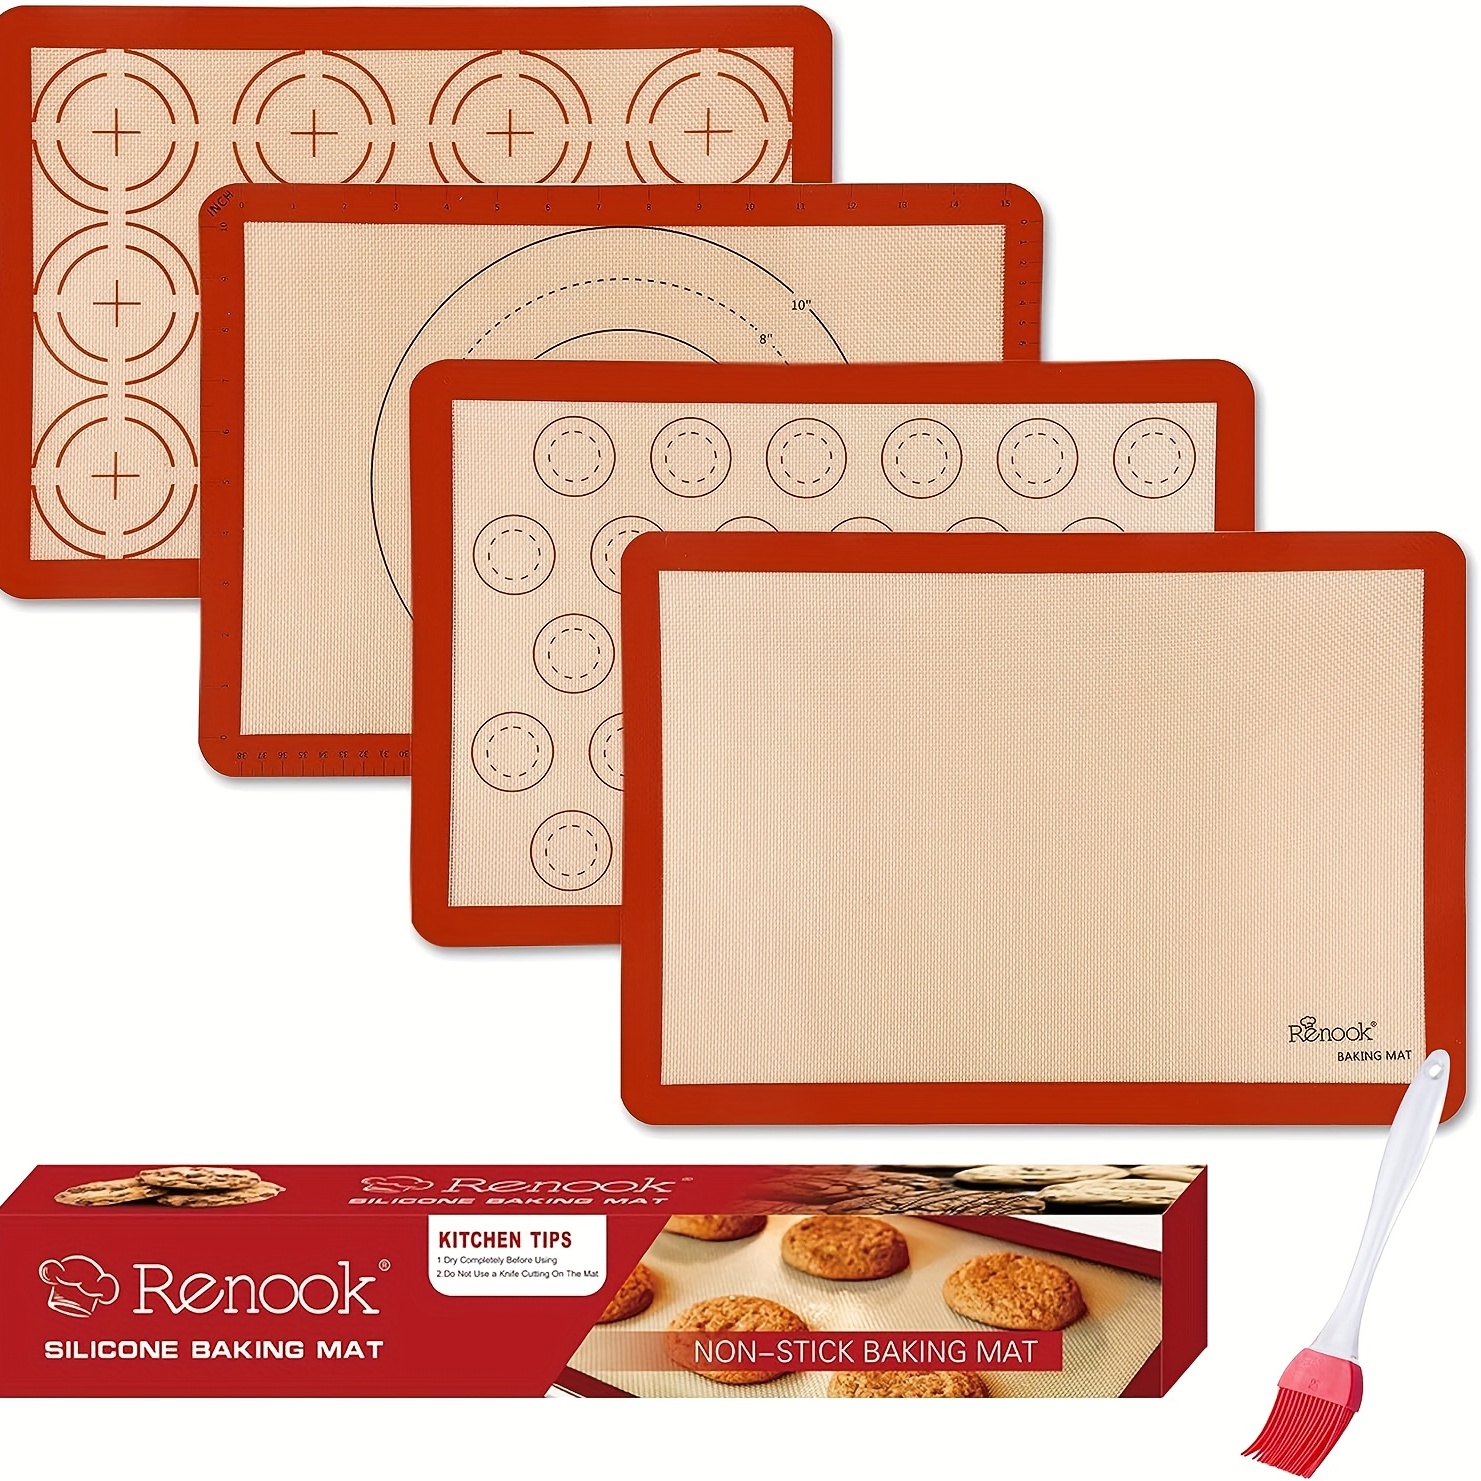 Kitchen + Home Silicone Baking Mats - Set of 2 Non-Stick, BPA Free Food Grade Silicone Mat Liners for Half-Size Cookie Sheet with Measurements